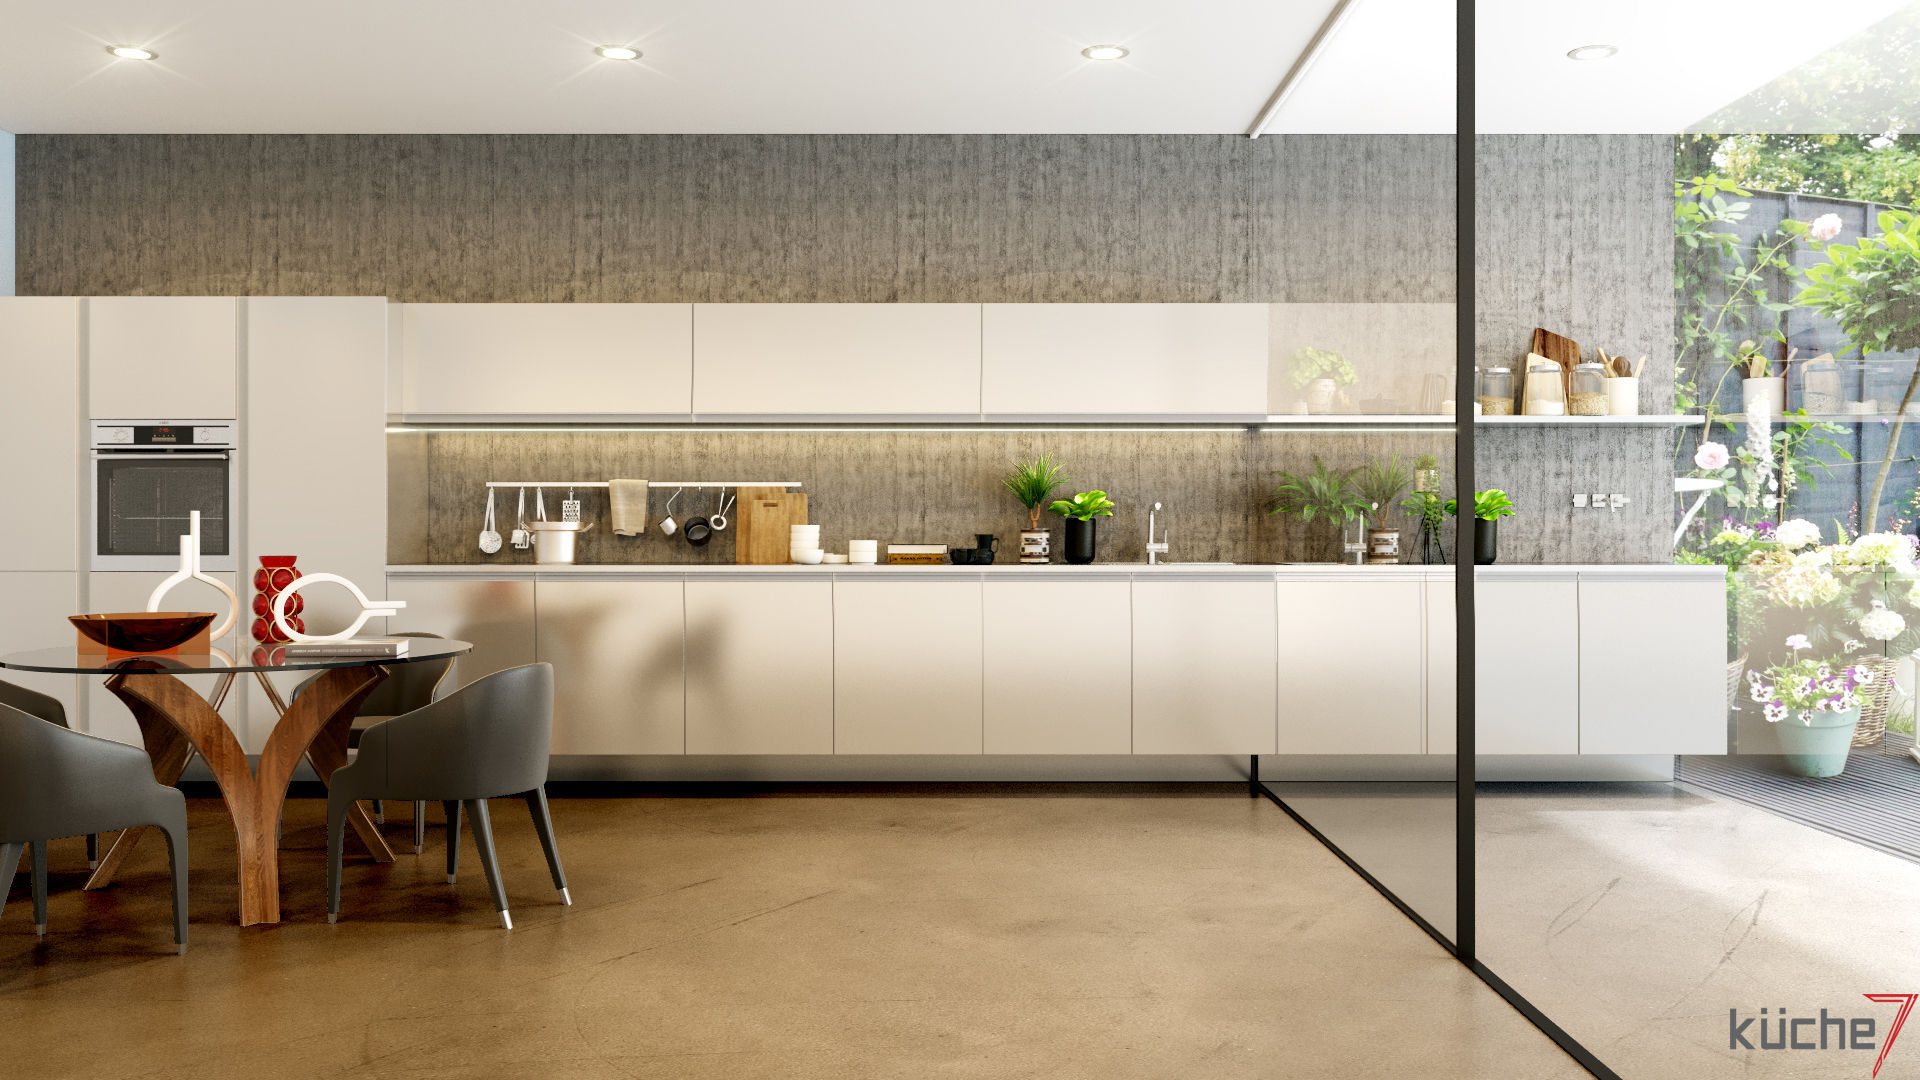 Luxury kitchens that outclasses all other kitchens you've seen, Küche7 Küche7 Inbouwkeukens